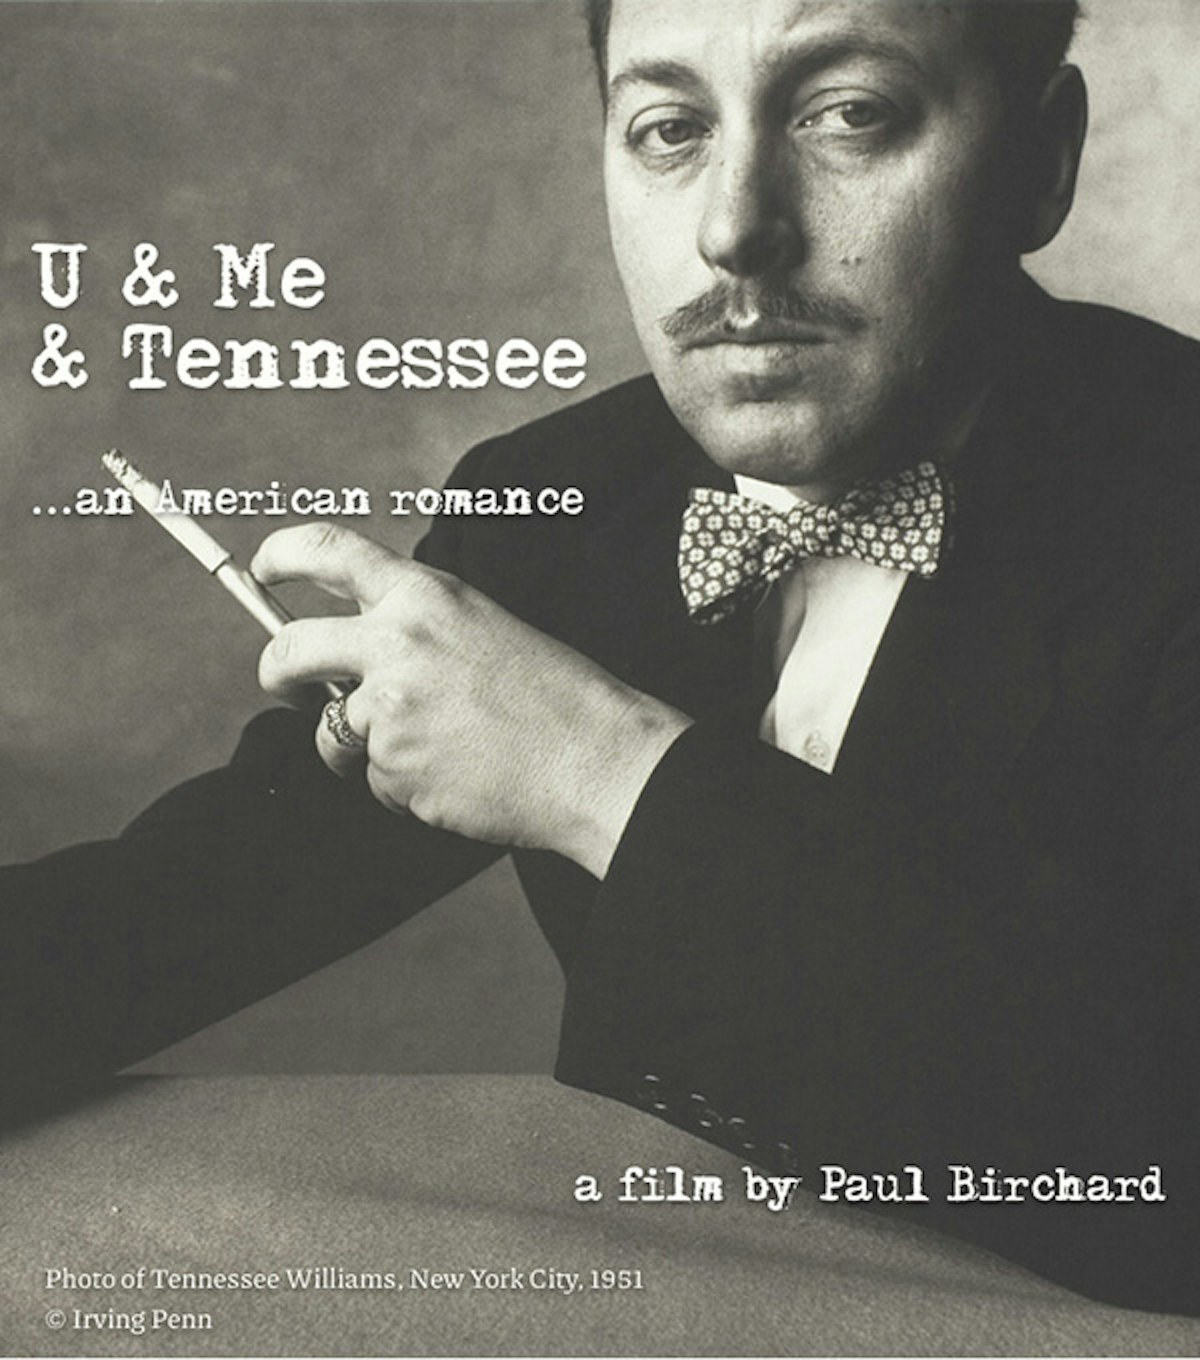 Photography of Tennessee Williams staring at the camera with title of documentary U & Me & Tennessee overlaid